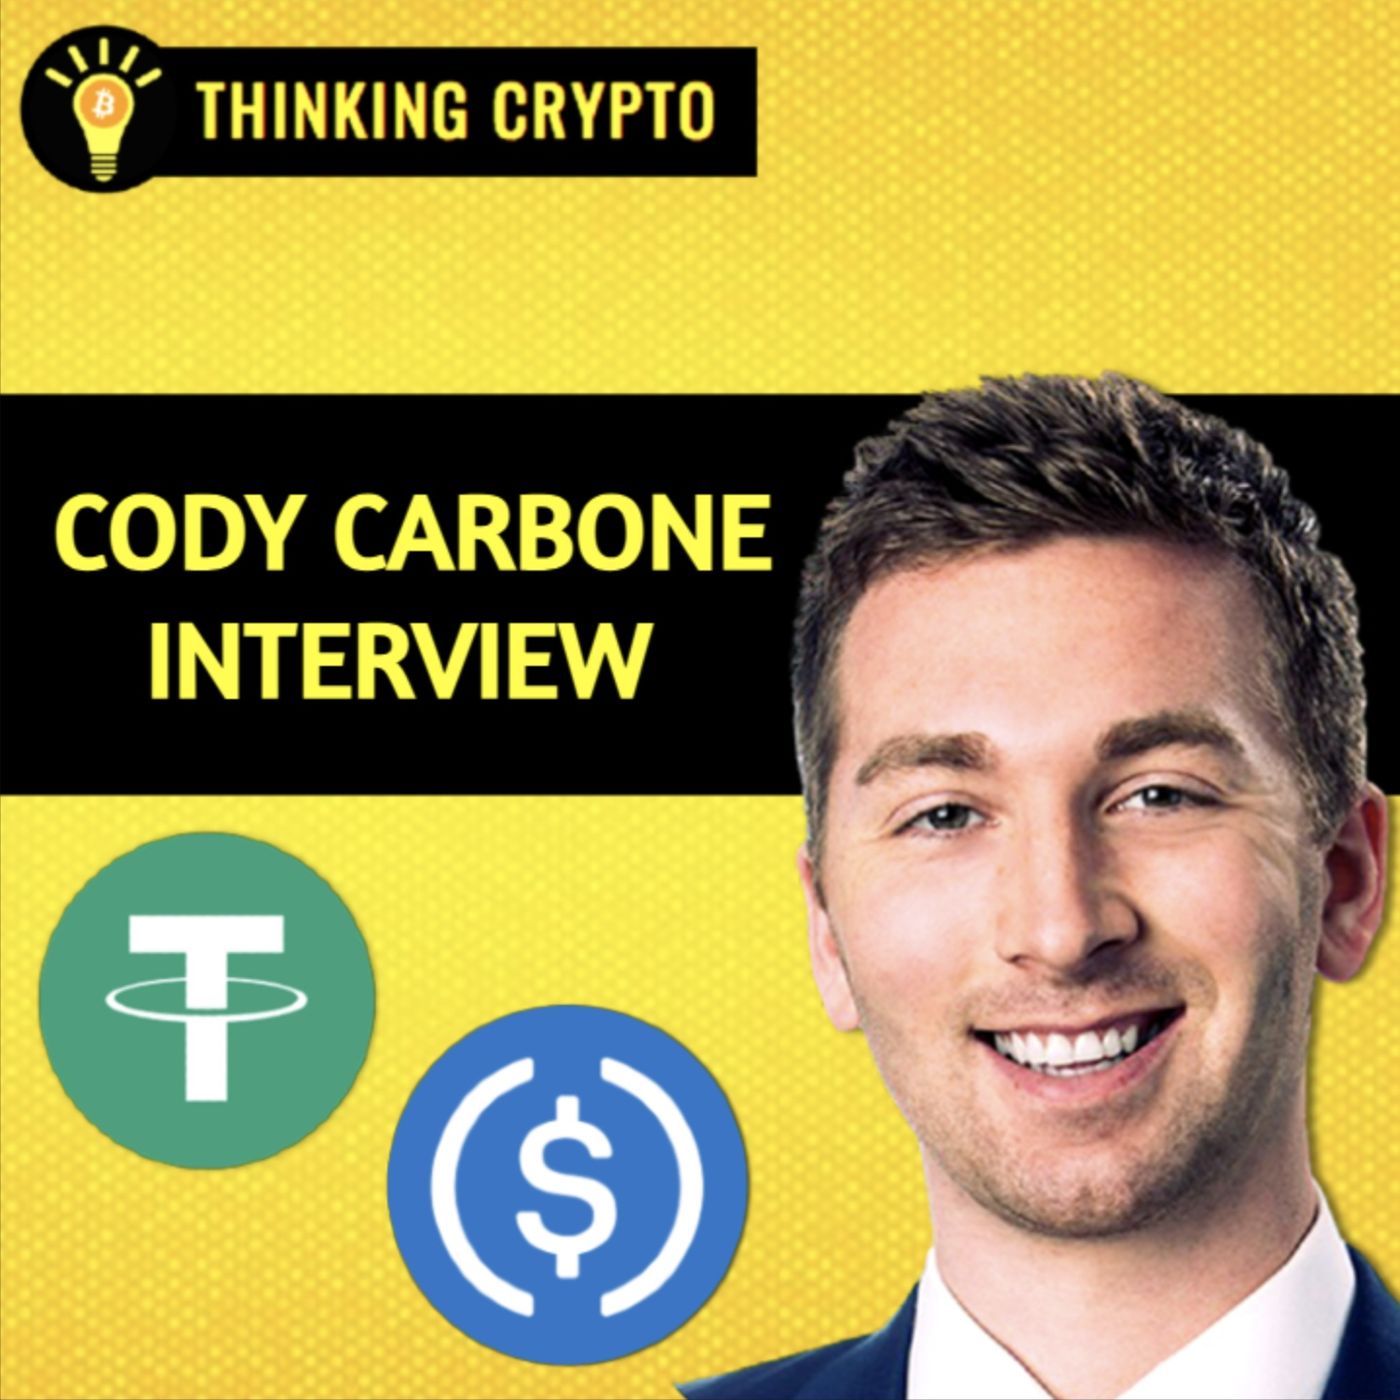 Cody Carbone - Crypto Regulation News! New Stablecoin Bill, SEC Goes After Ethereum, Patrick McHenry, Gary Gensler